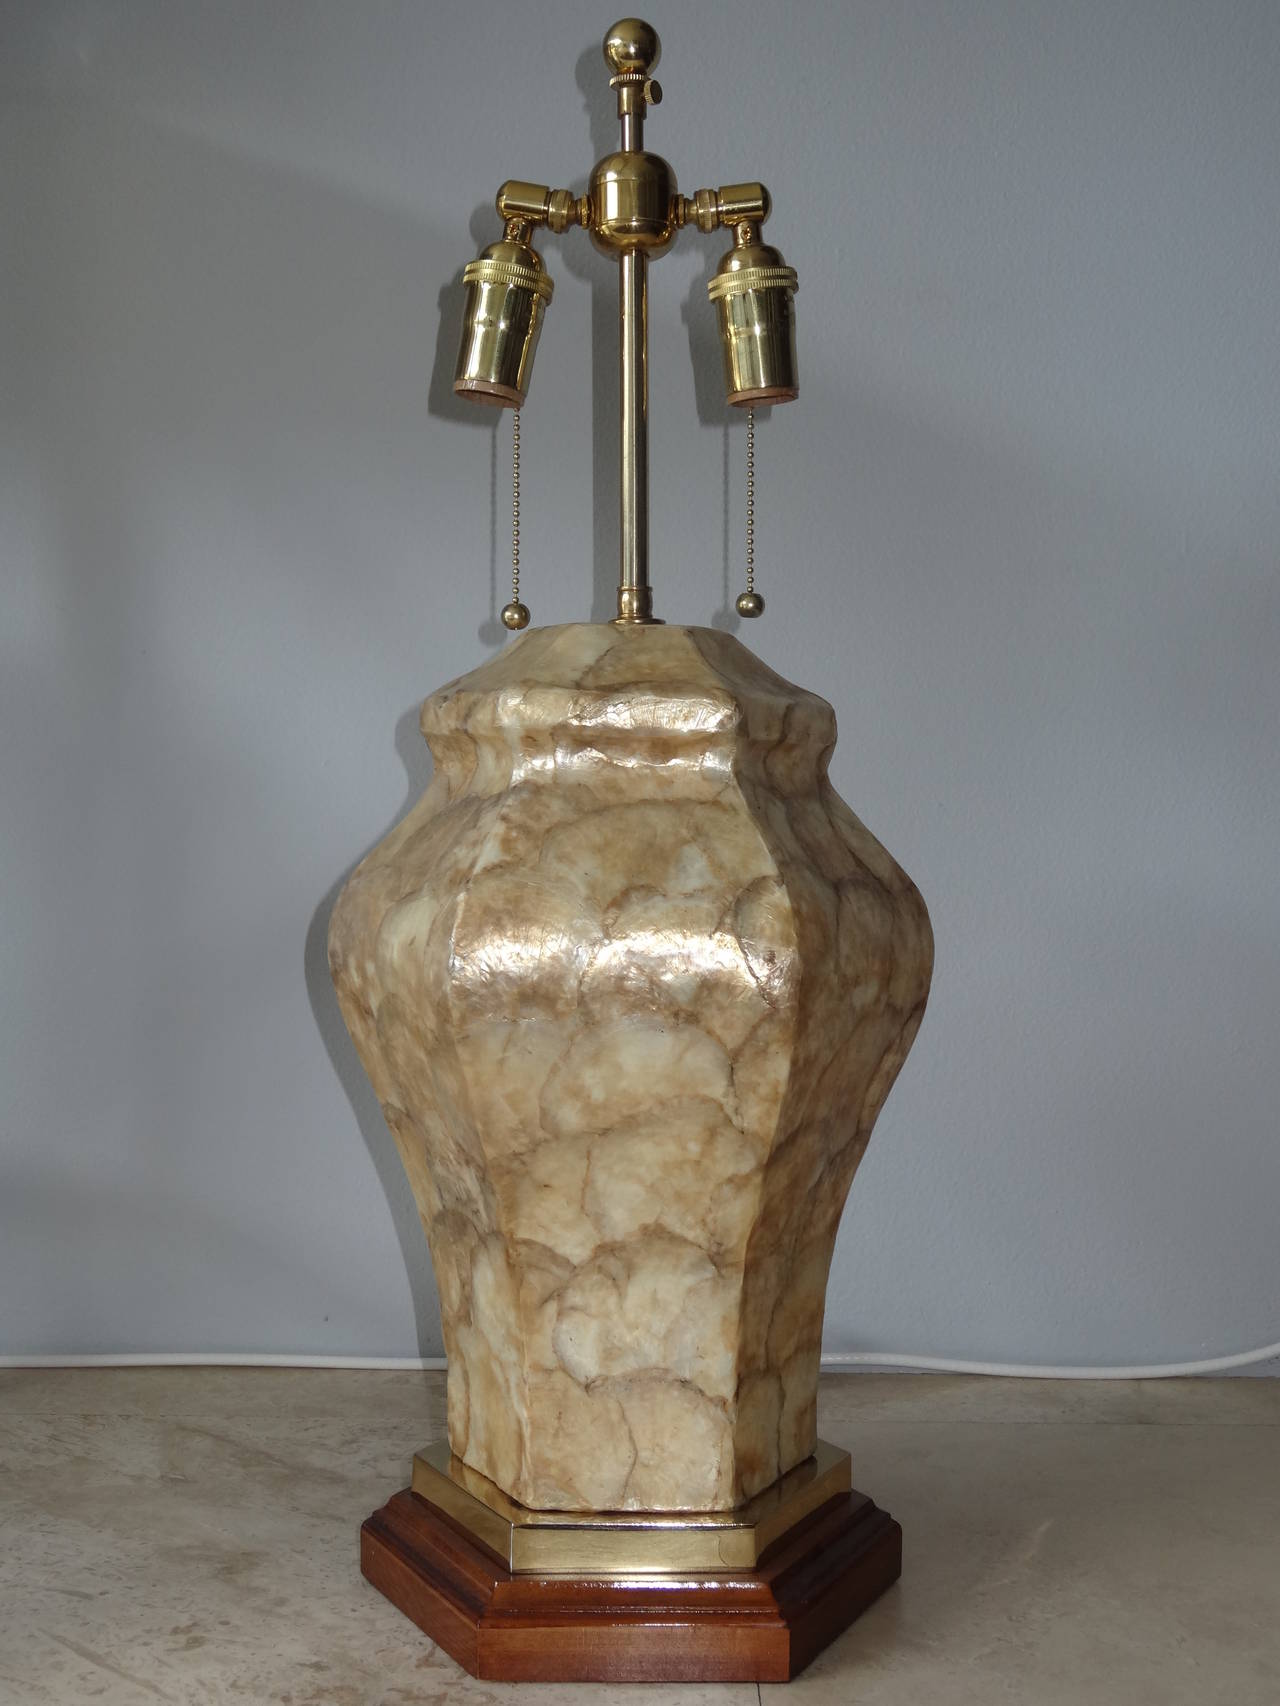 Beautiful pair of Capiz shell covered urn lamps with wood and brass pedestal great scale and form. Lamps have been rewired and brass polished.